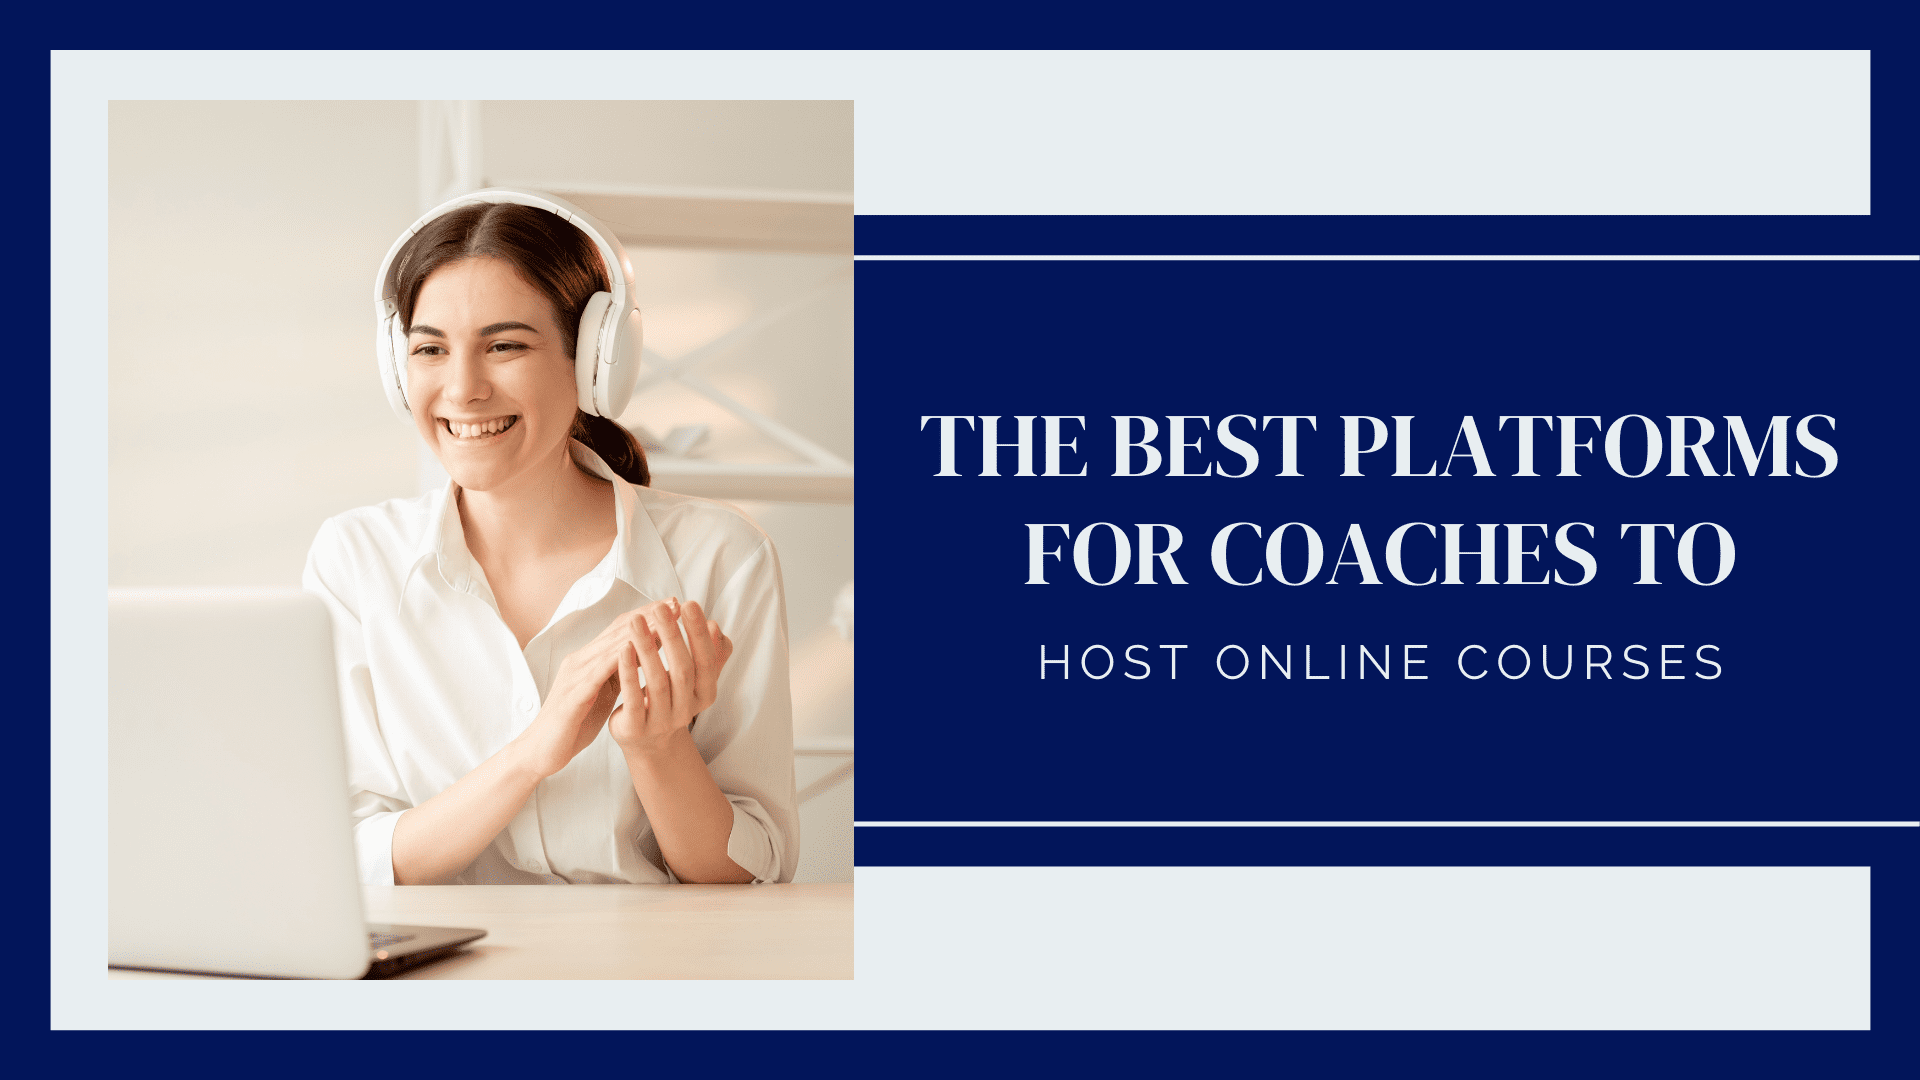 The Best Platforms for Coaches to Host Online Courses